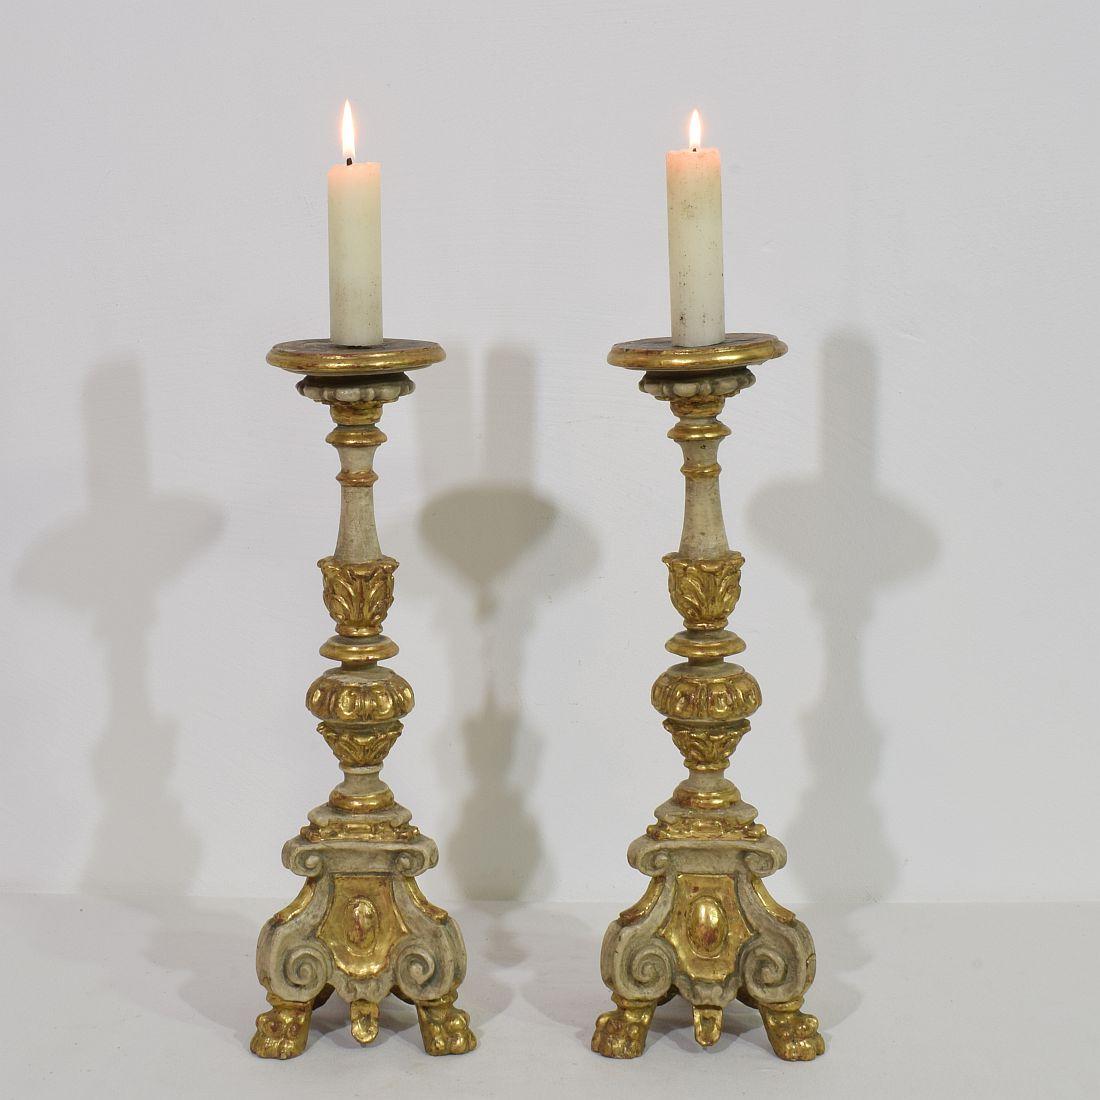 Greats pair of Baroque carved wooden candleholders. Italy, circa 1750-1780. Weathered, repairs and small losses.
More pictures available on request. Measurement individual.